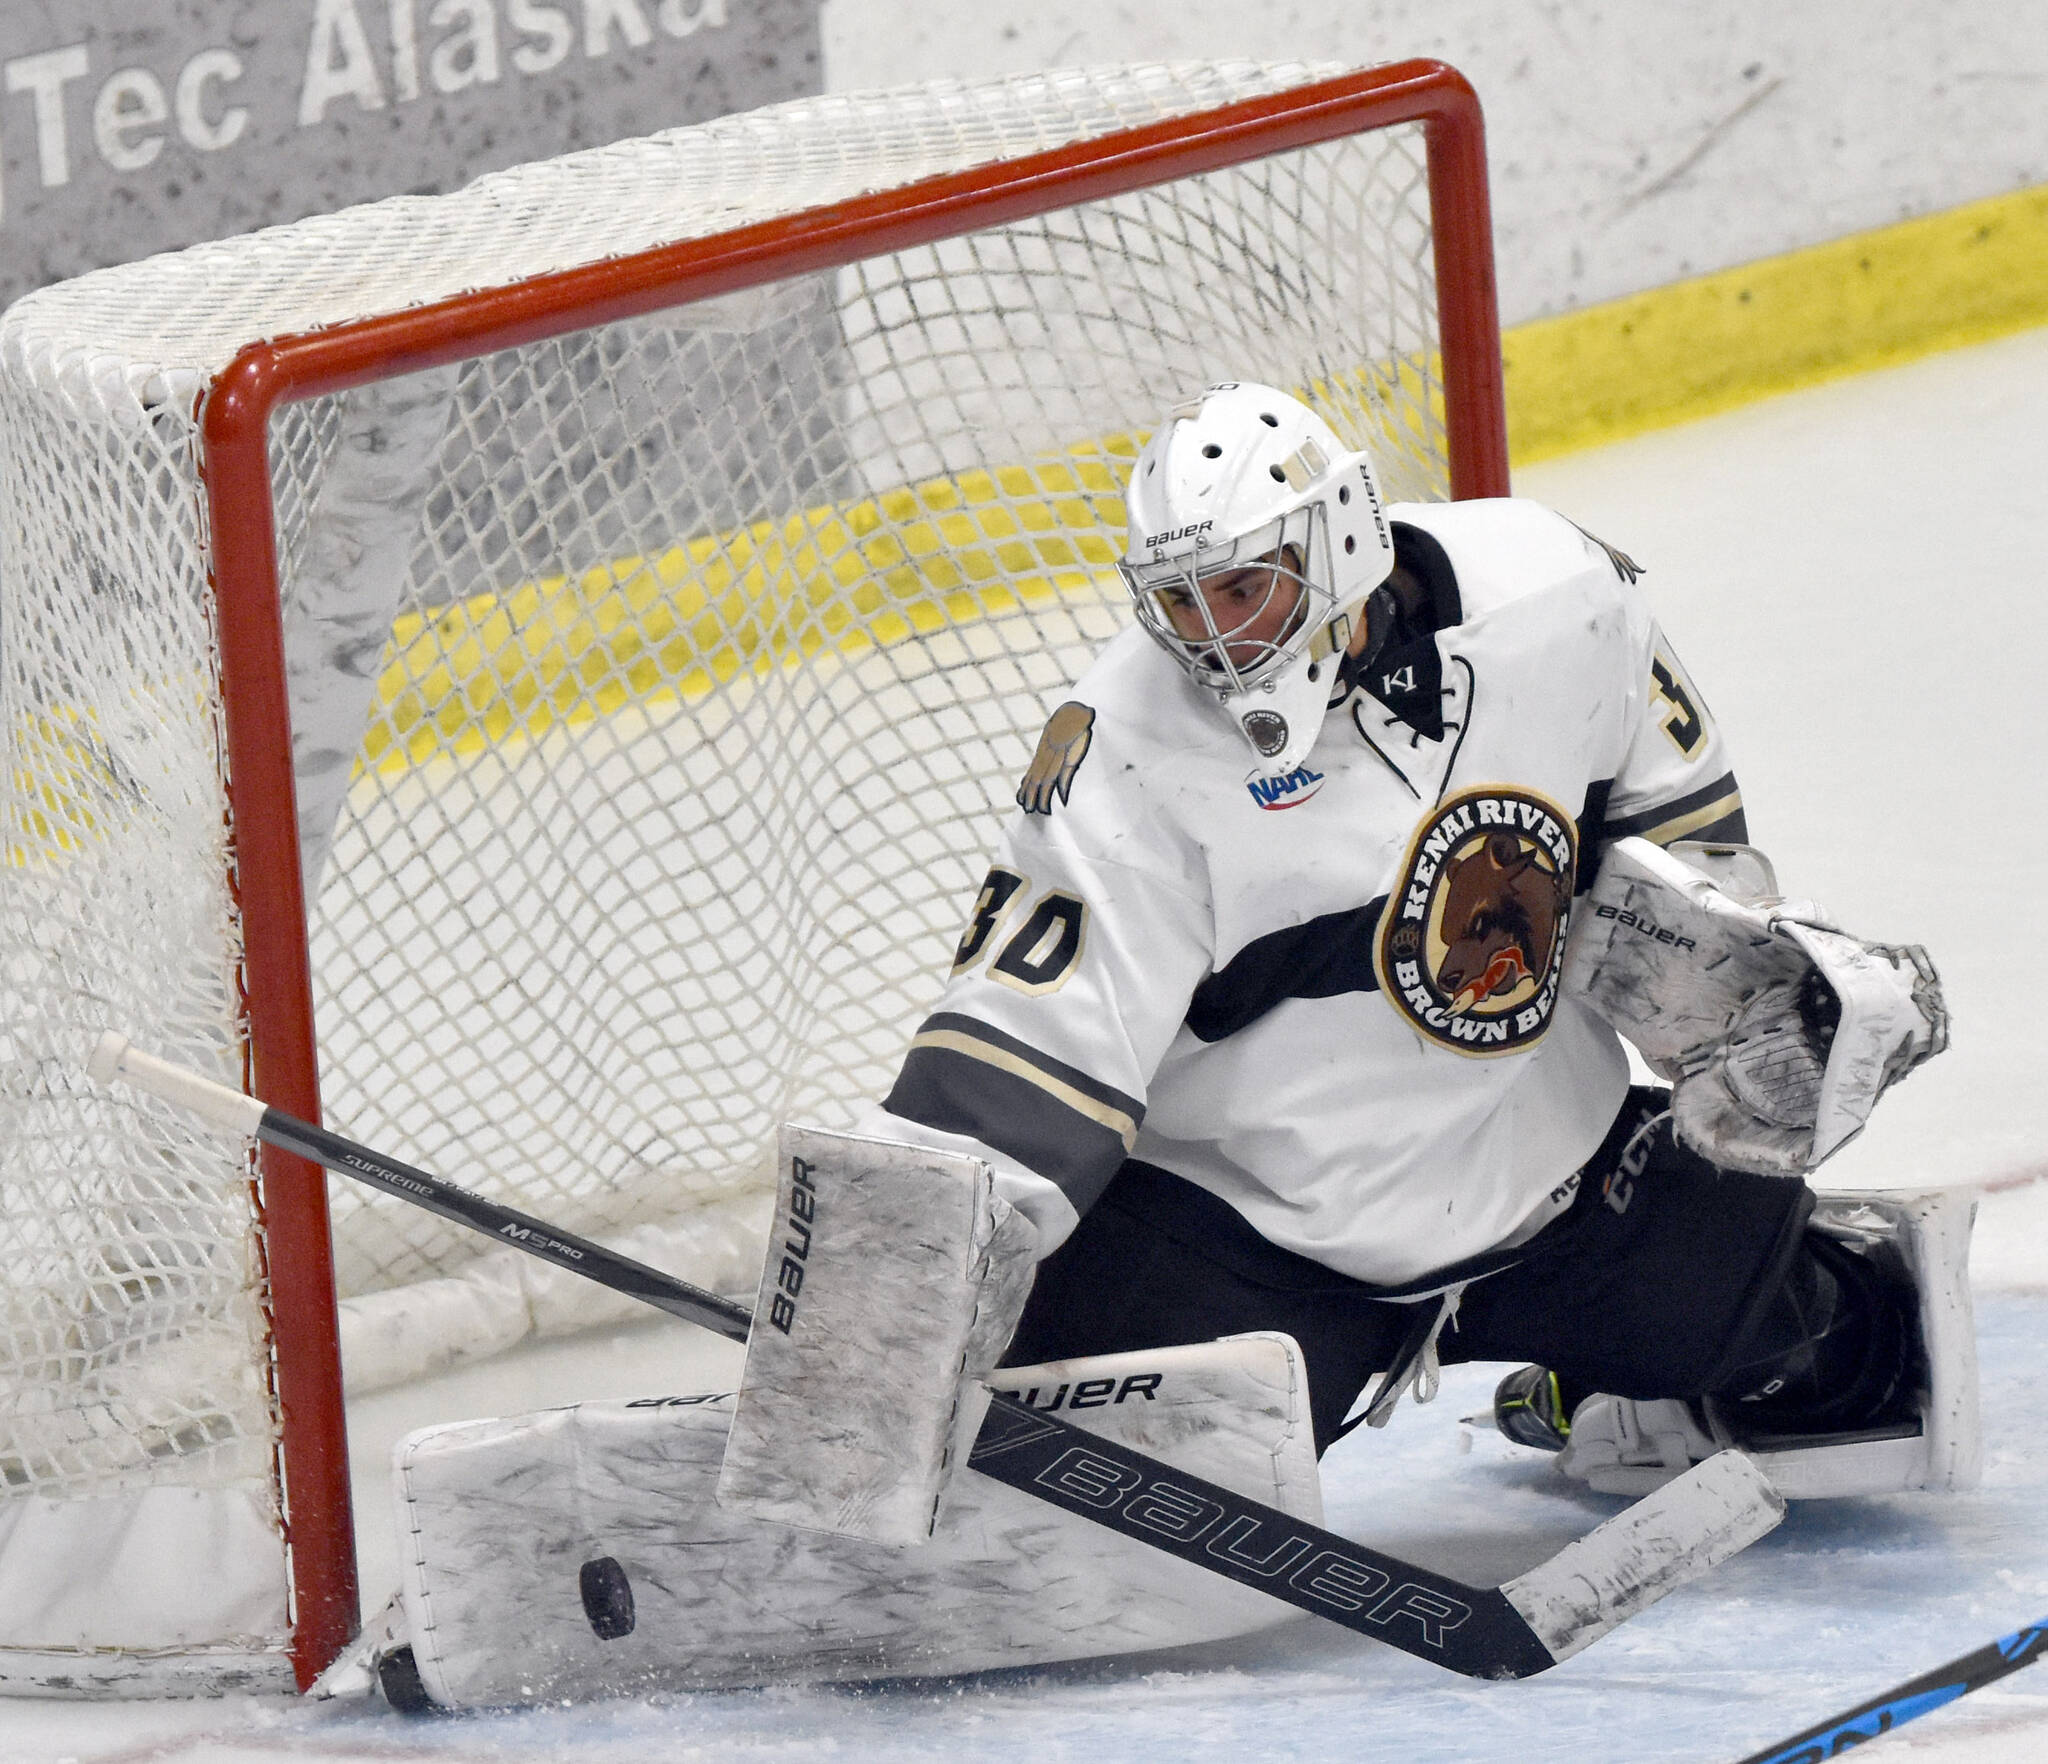 Kenai River goalie Bryant Marks makes a kick save against the Chippewa (Wisconsin) Steel on Saturday, Oct. 29, 2022, at the Soldotna Regional Sports Complex in Soldotna, Alaska. (Photo by Jeff Helminiak/Peninsula Clarion)